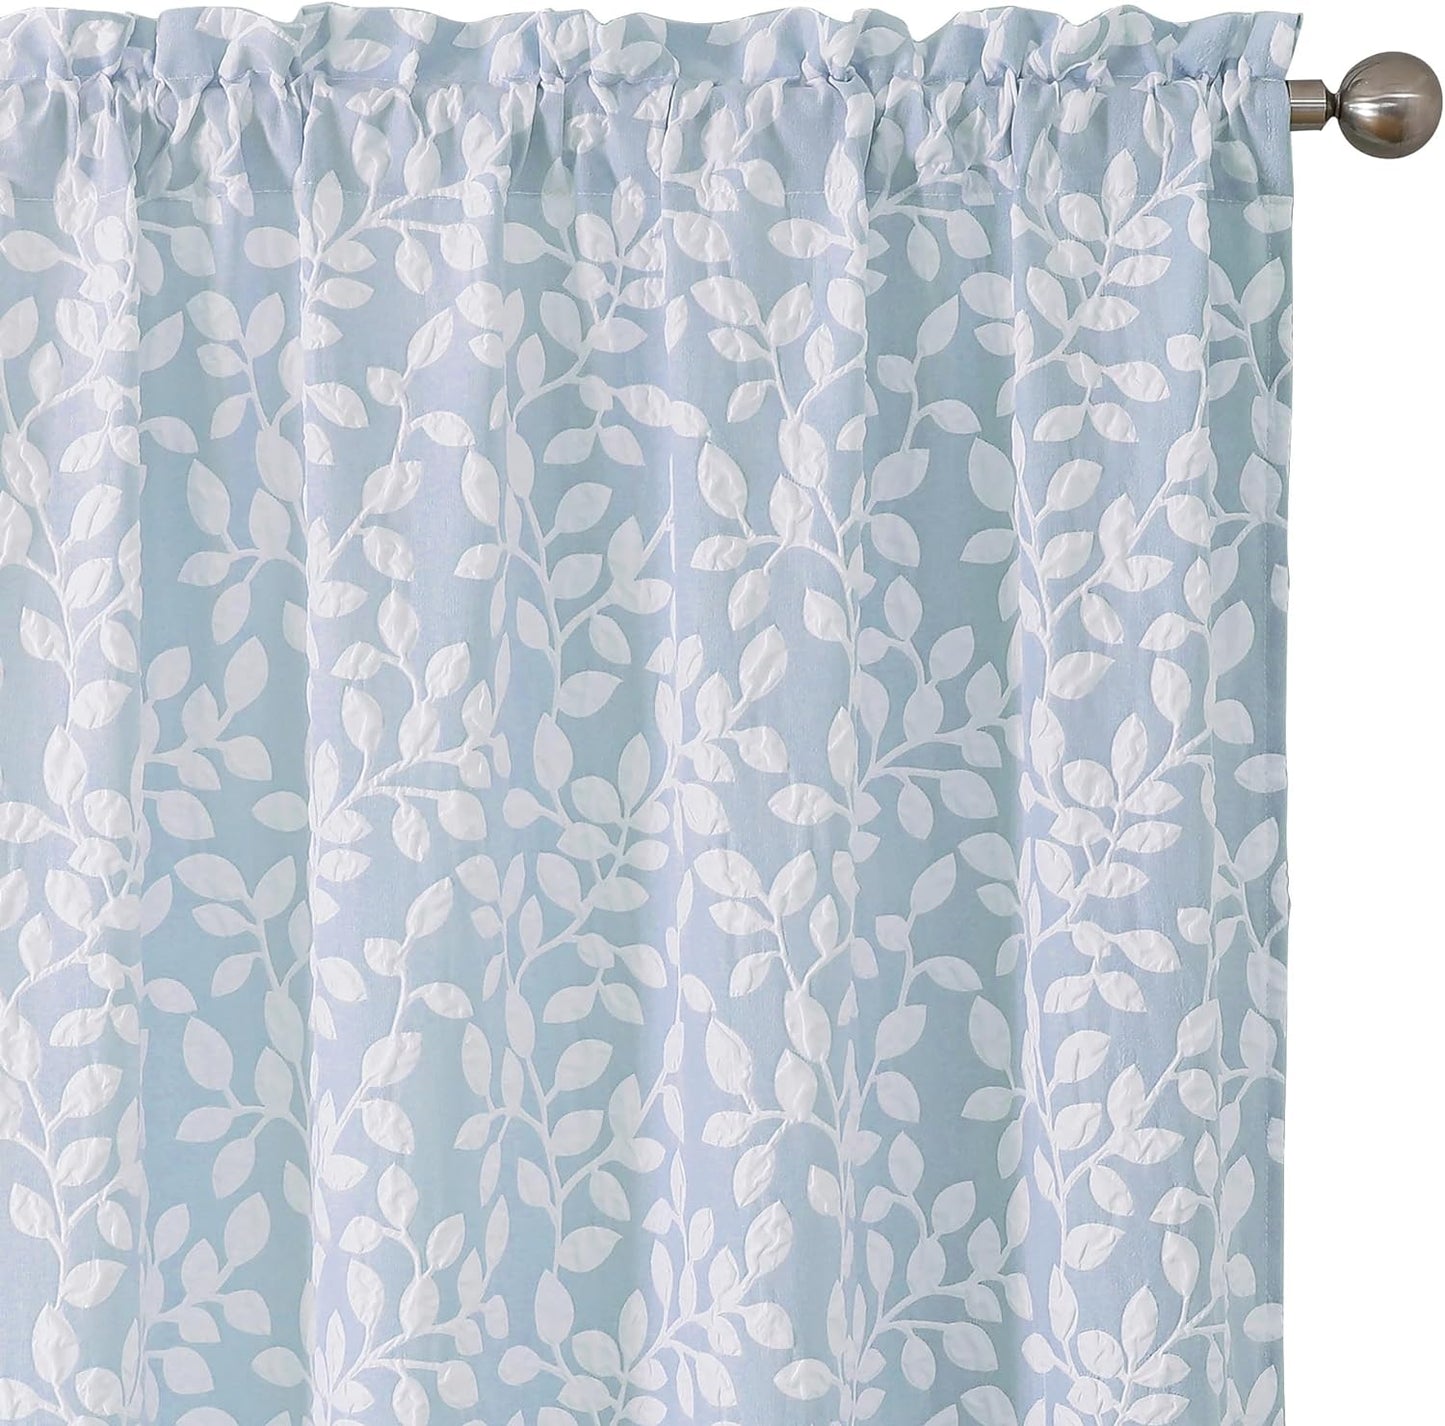 Chyhomenyc Anna White Taupe Curtains 63 Inch Length 2 Panels, Light Filtering Soft Airy 3D Embossed Textured Leaf Pattern Drapes for Bedroom Living Room Windows, Each 42Wx63L Inches  Chyhomenyc Blue White 42 W X 54 L 